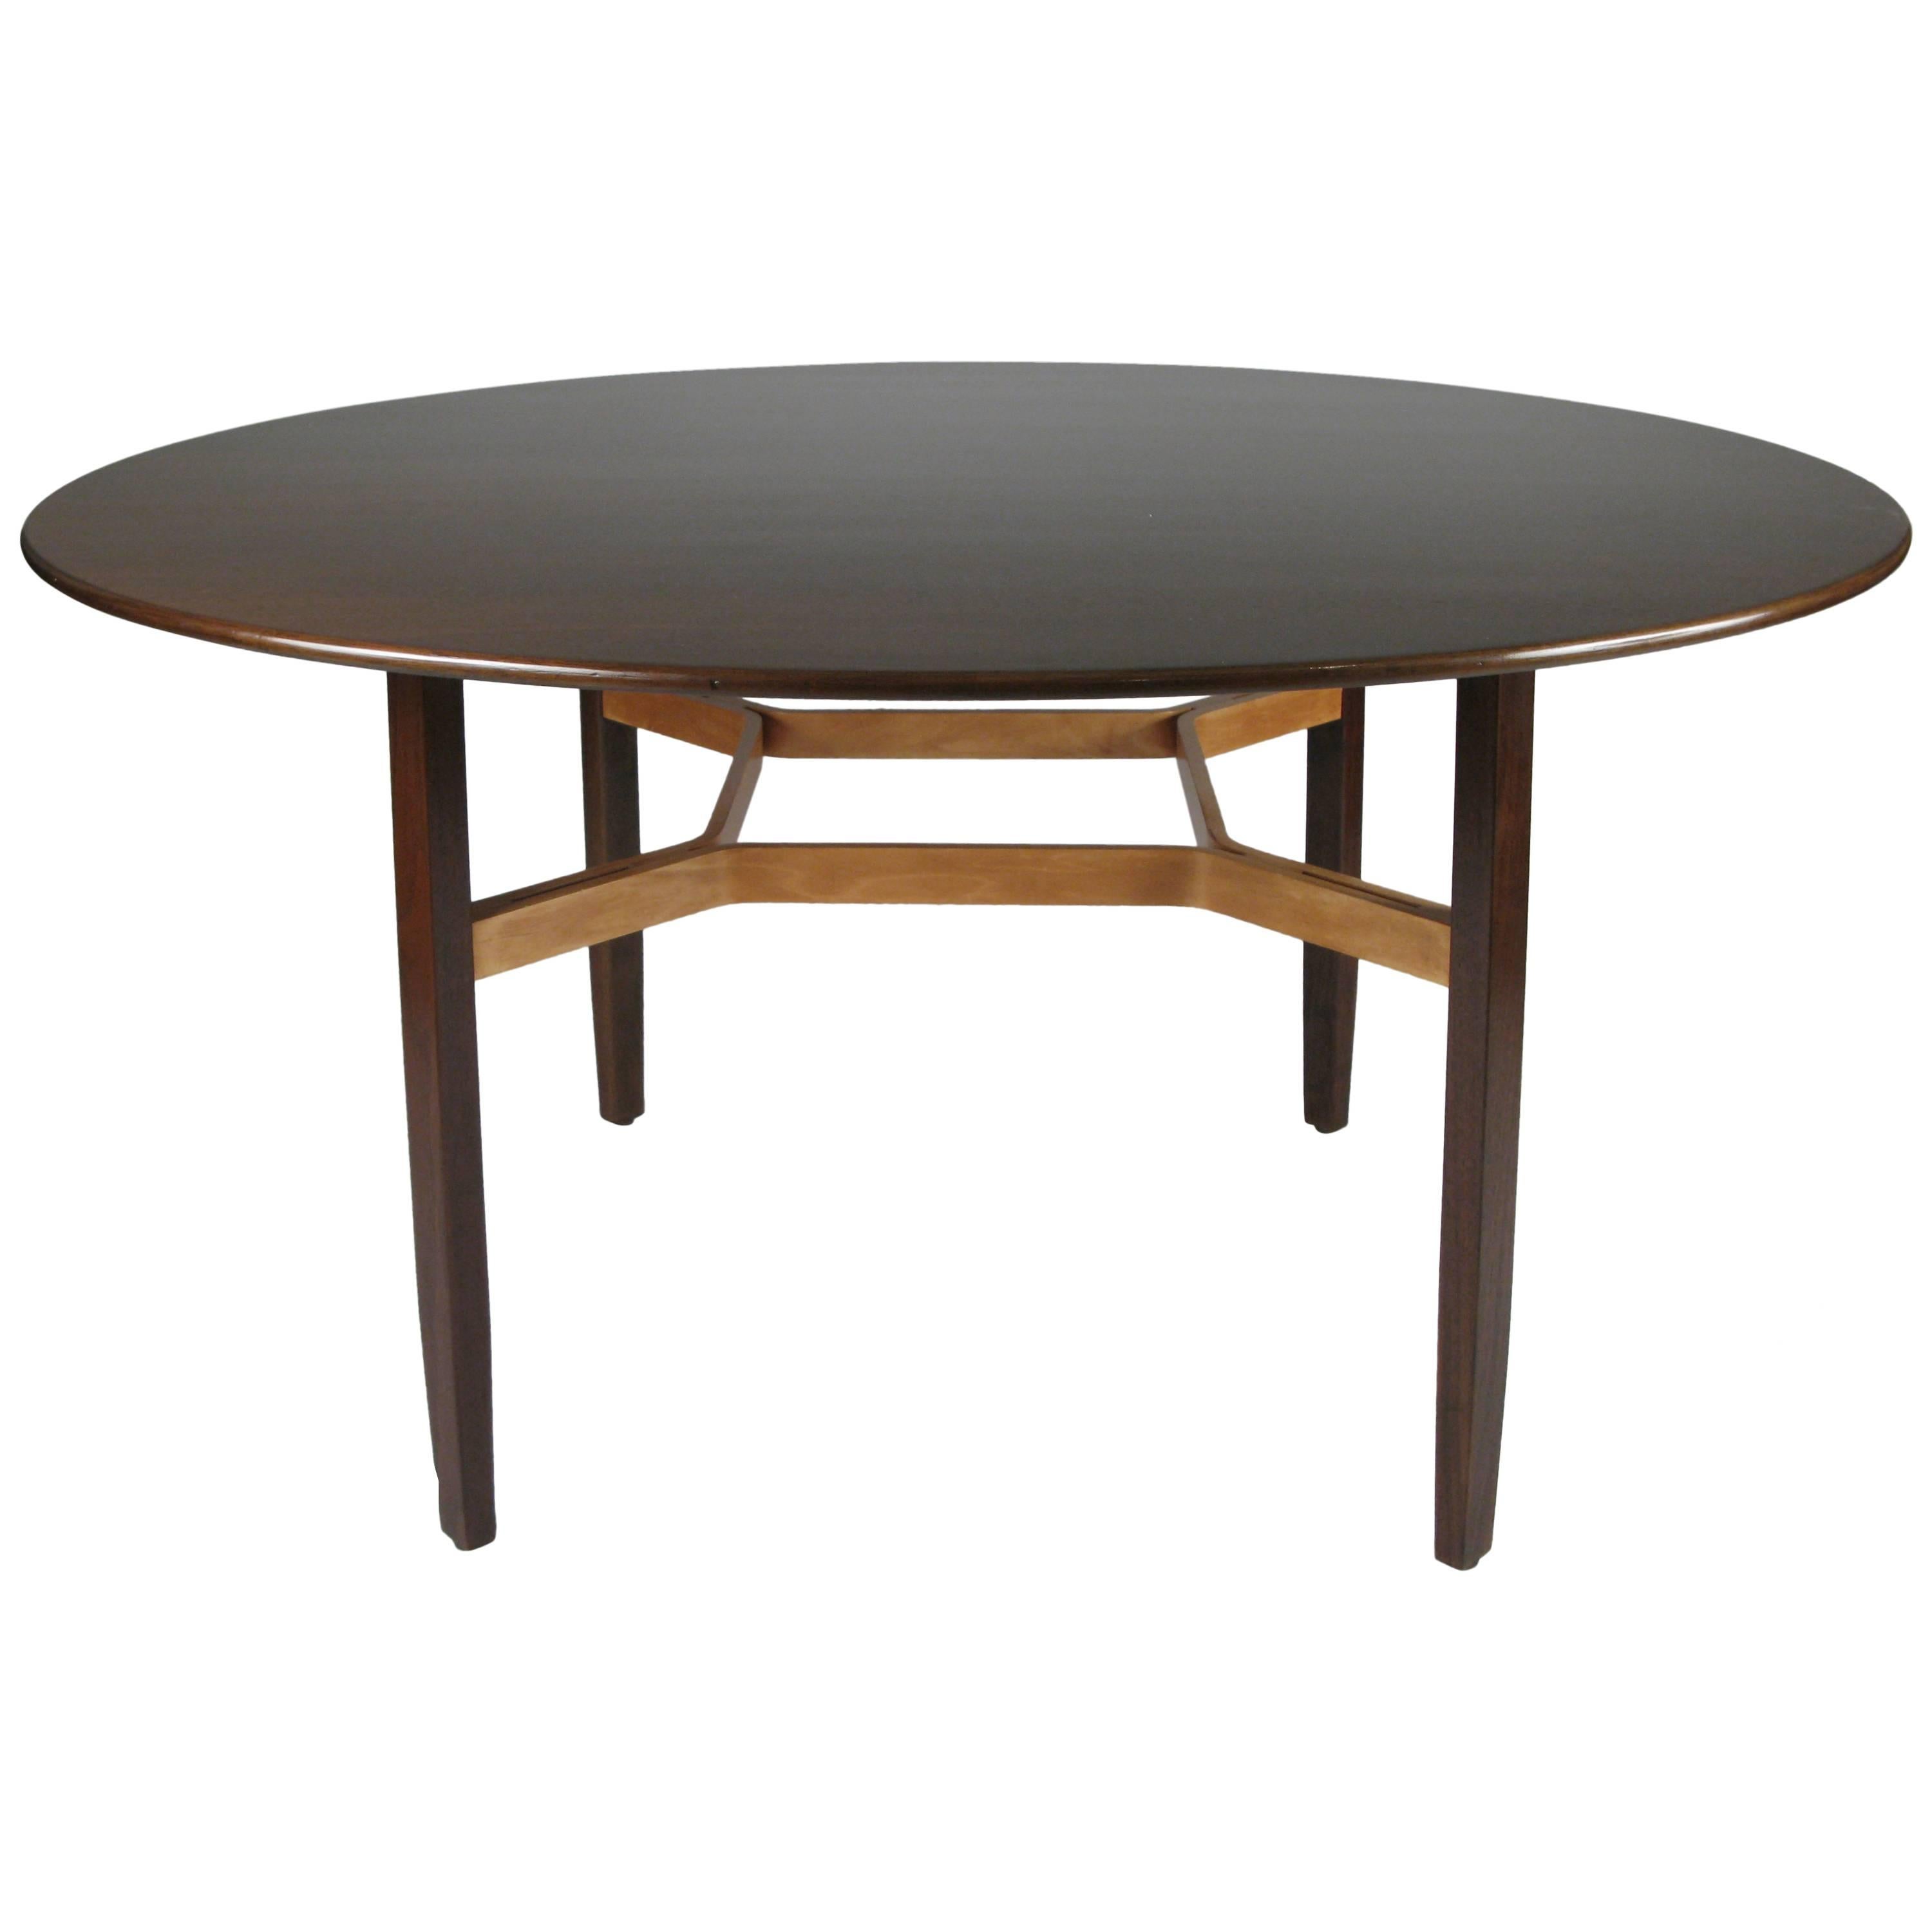 Walnut and Birch Dining Table by Lewis Butler for Knoll